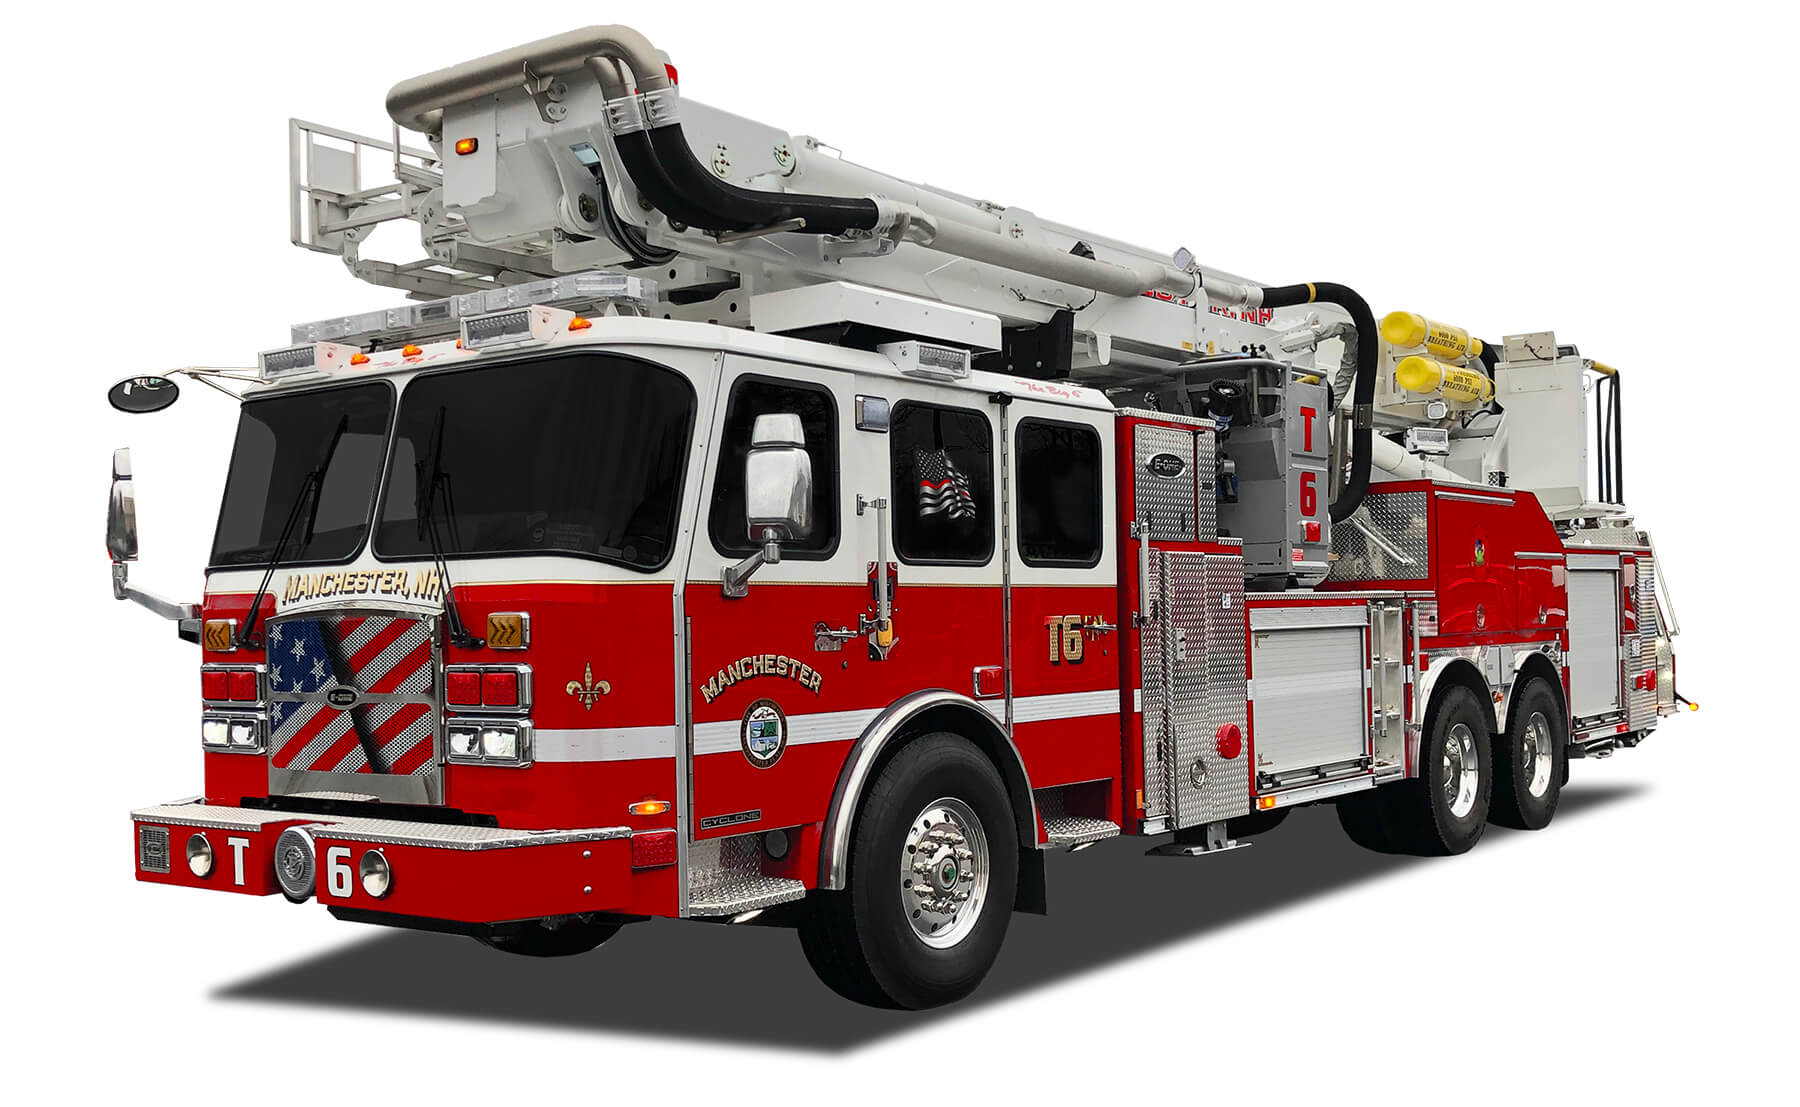 Image of E-One Fire Truck on a white background